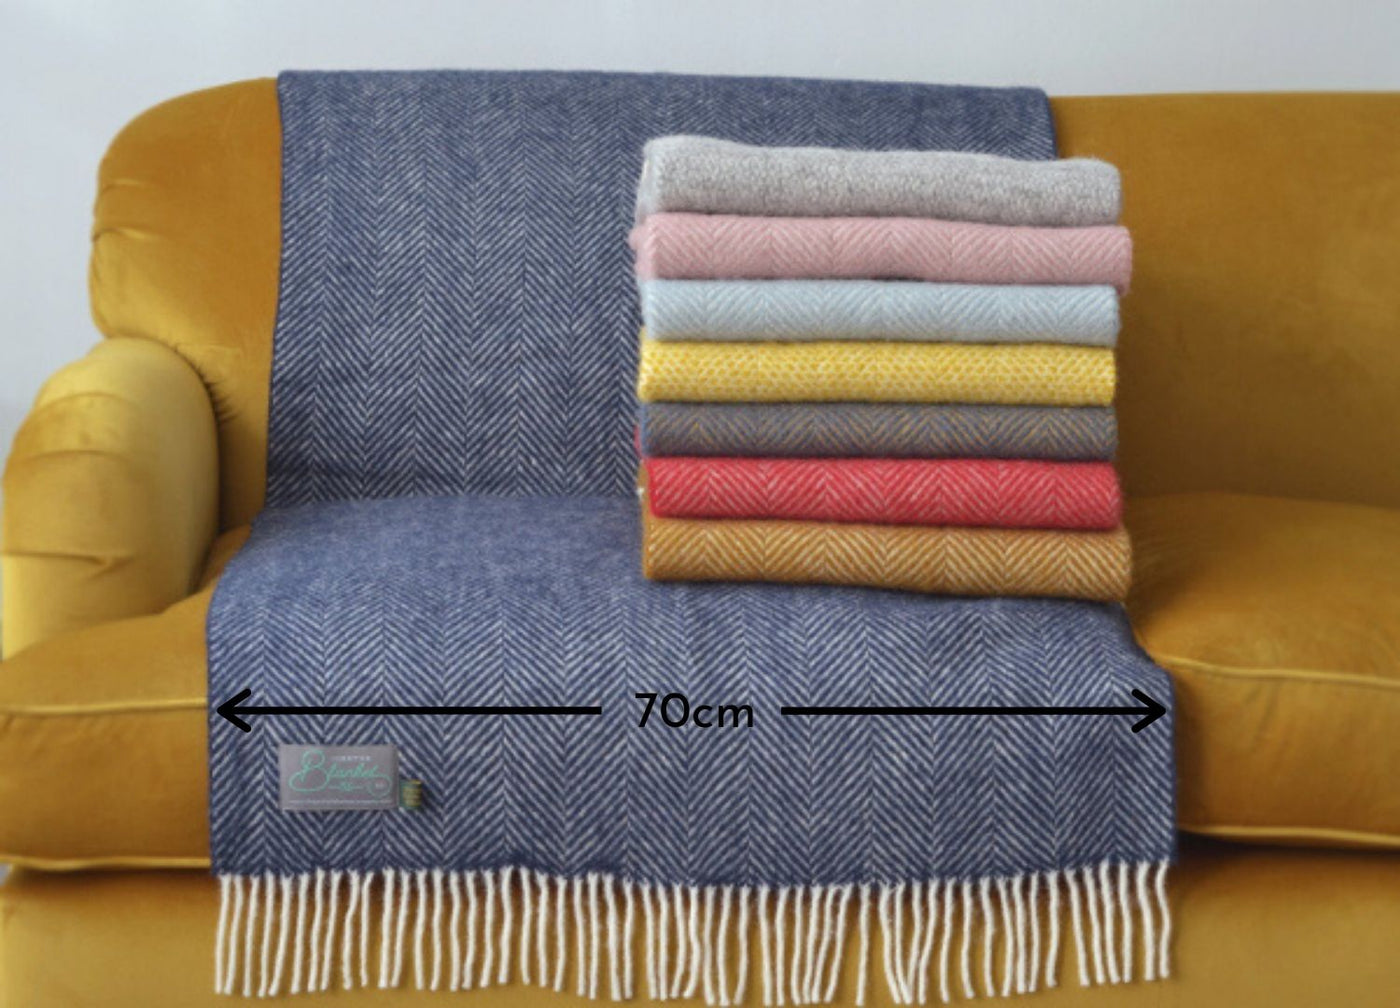 Folded wool blankets stacked on top of a yellow sofa. A blue blanket measuring 70 centimeters in width is draped over the sofa